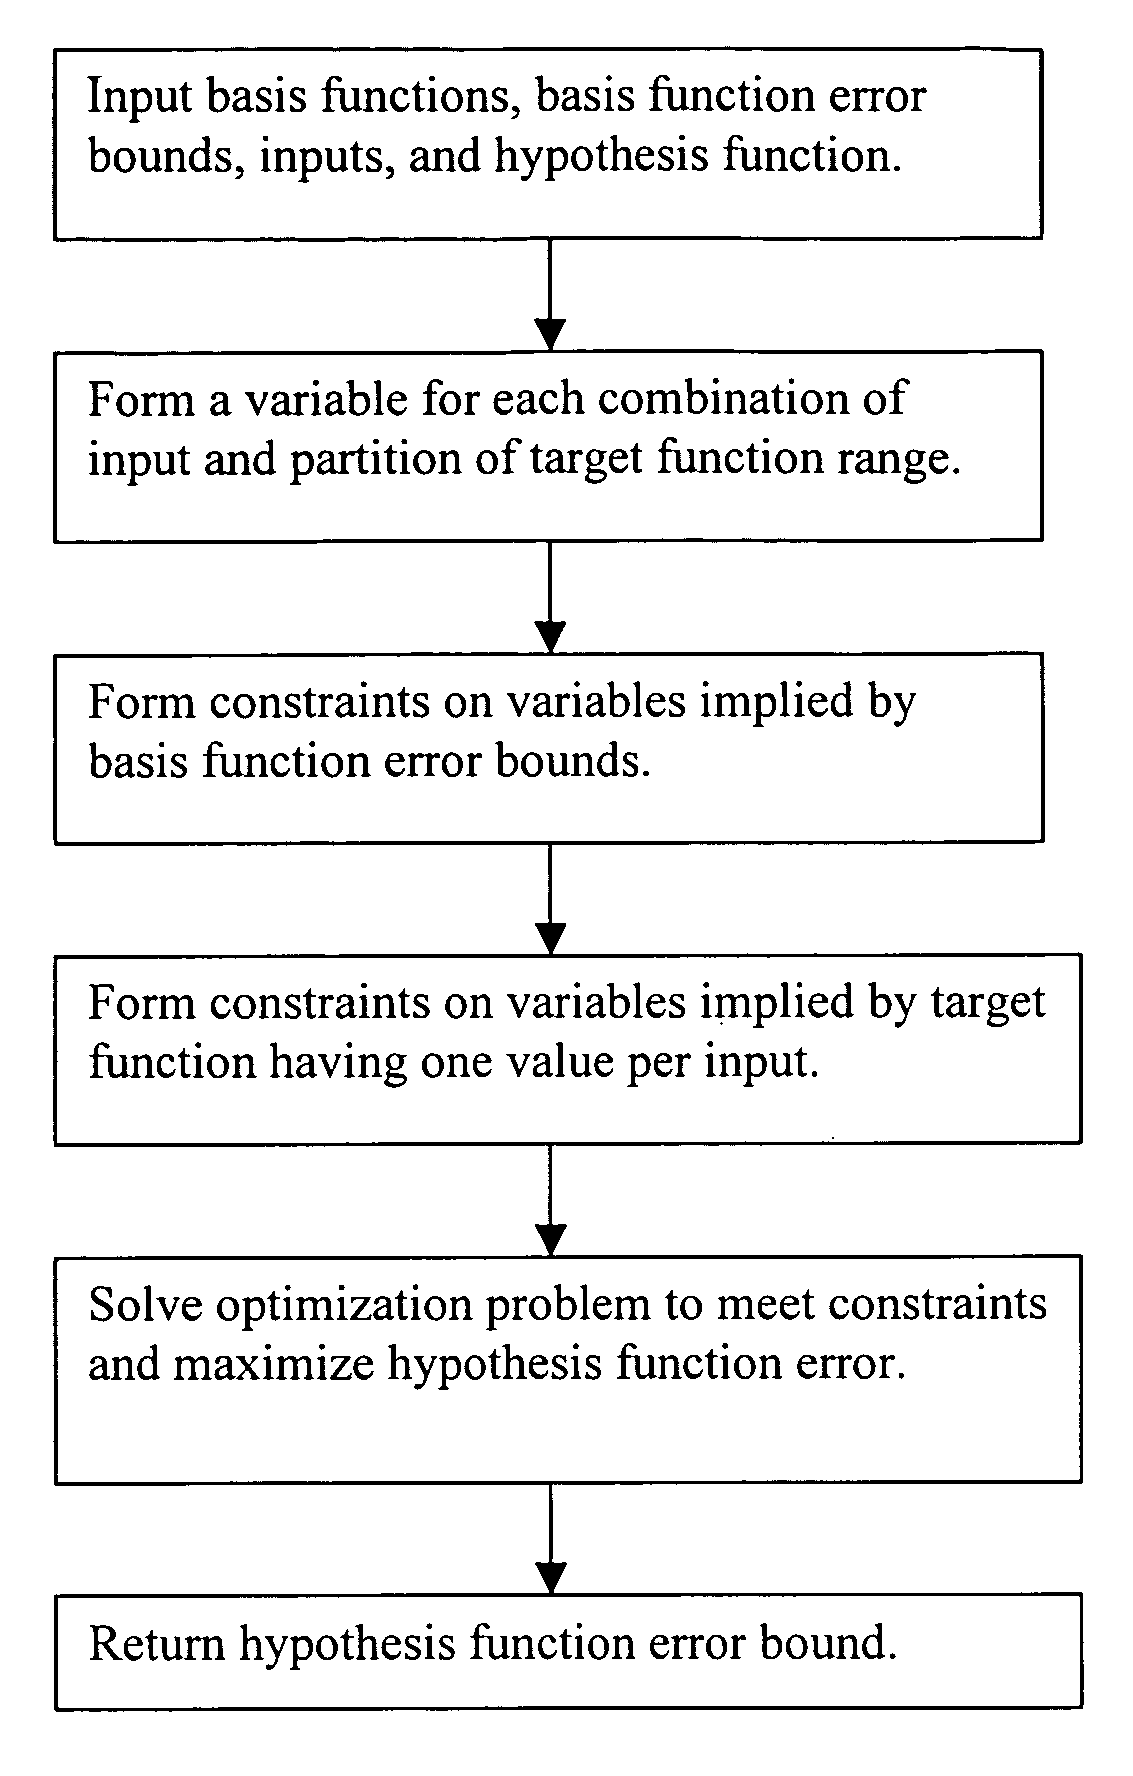 Validation of function approximation by fusion